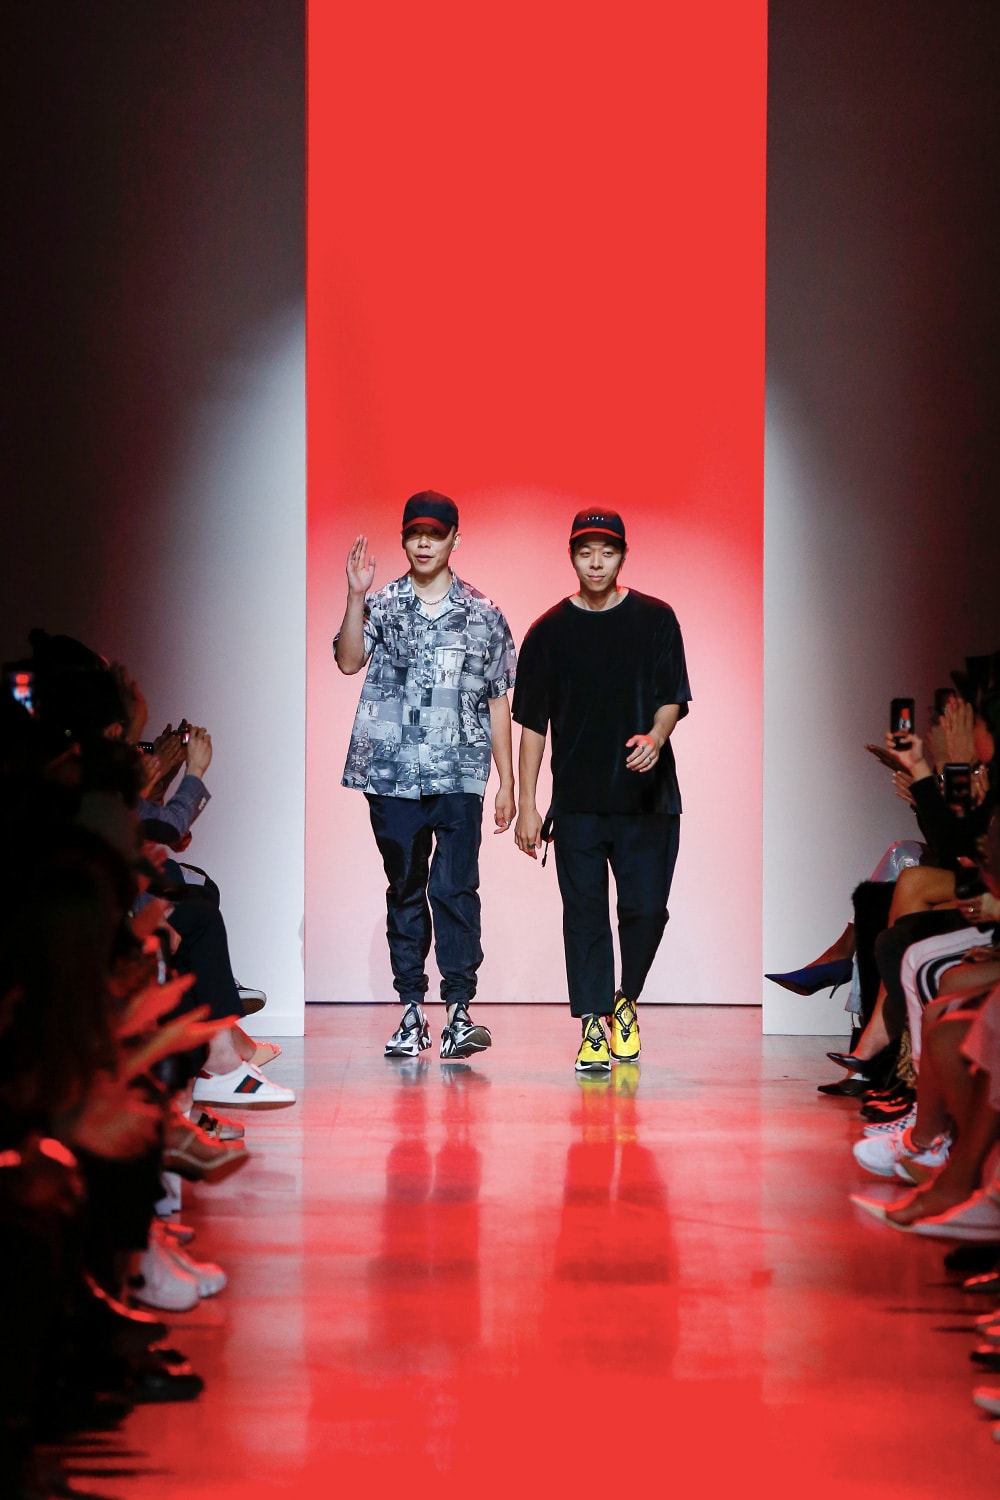 IISE Spring/Summer 2020 Runway Collection NYFW New York Fashion Week brand streetwear contemporary menswear unisex cctv prints street fashion chaebol conglomerate concept korea terrence kevin kim